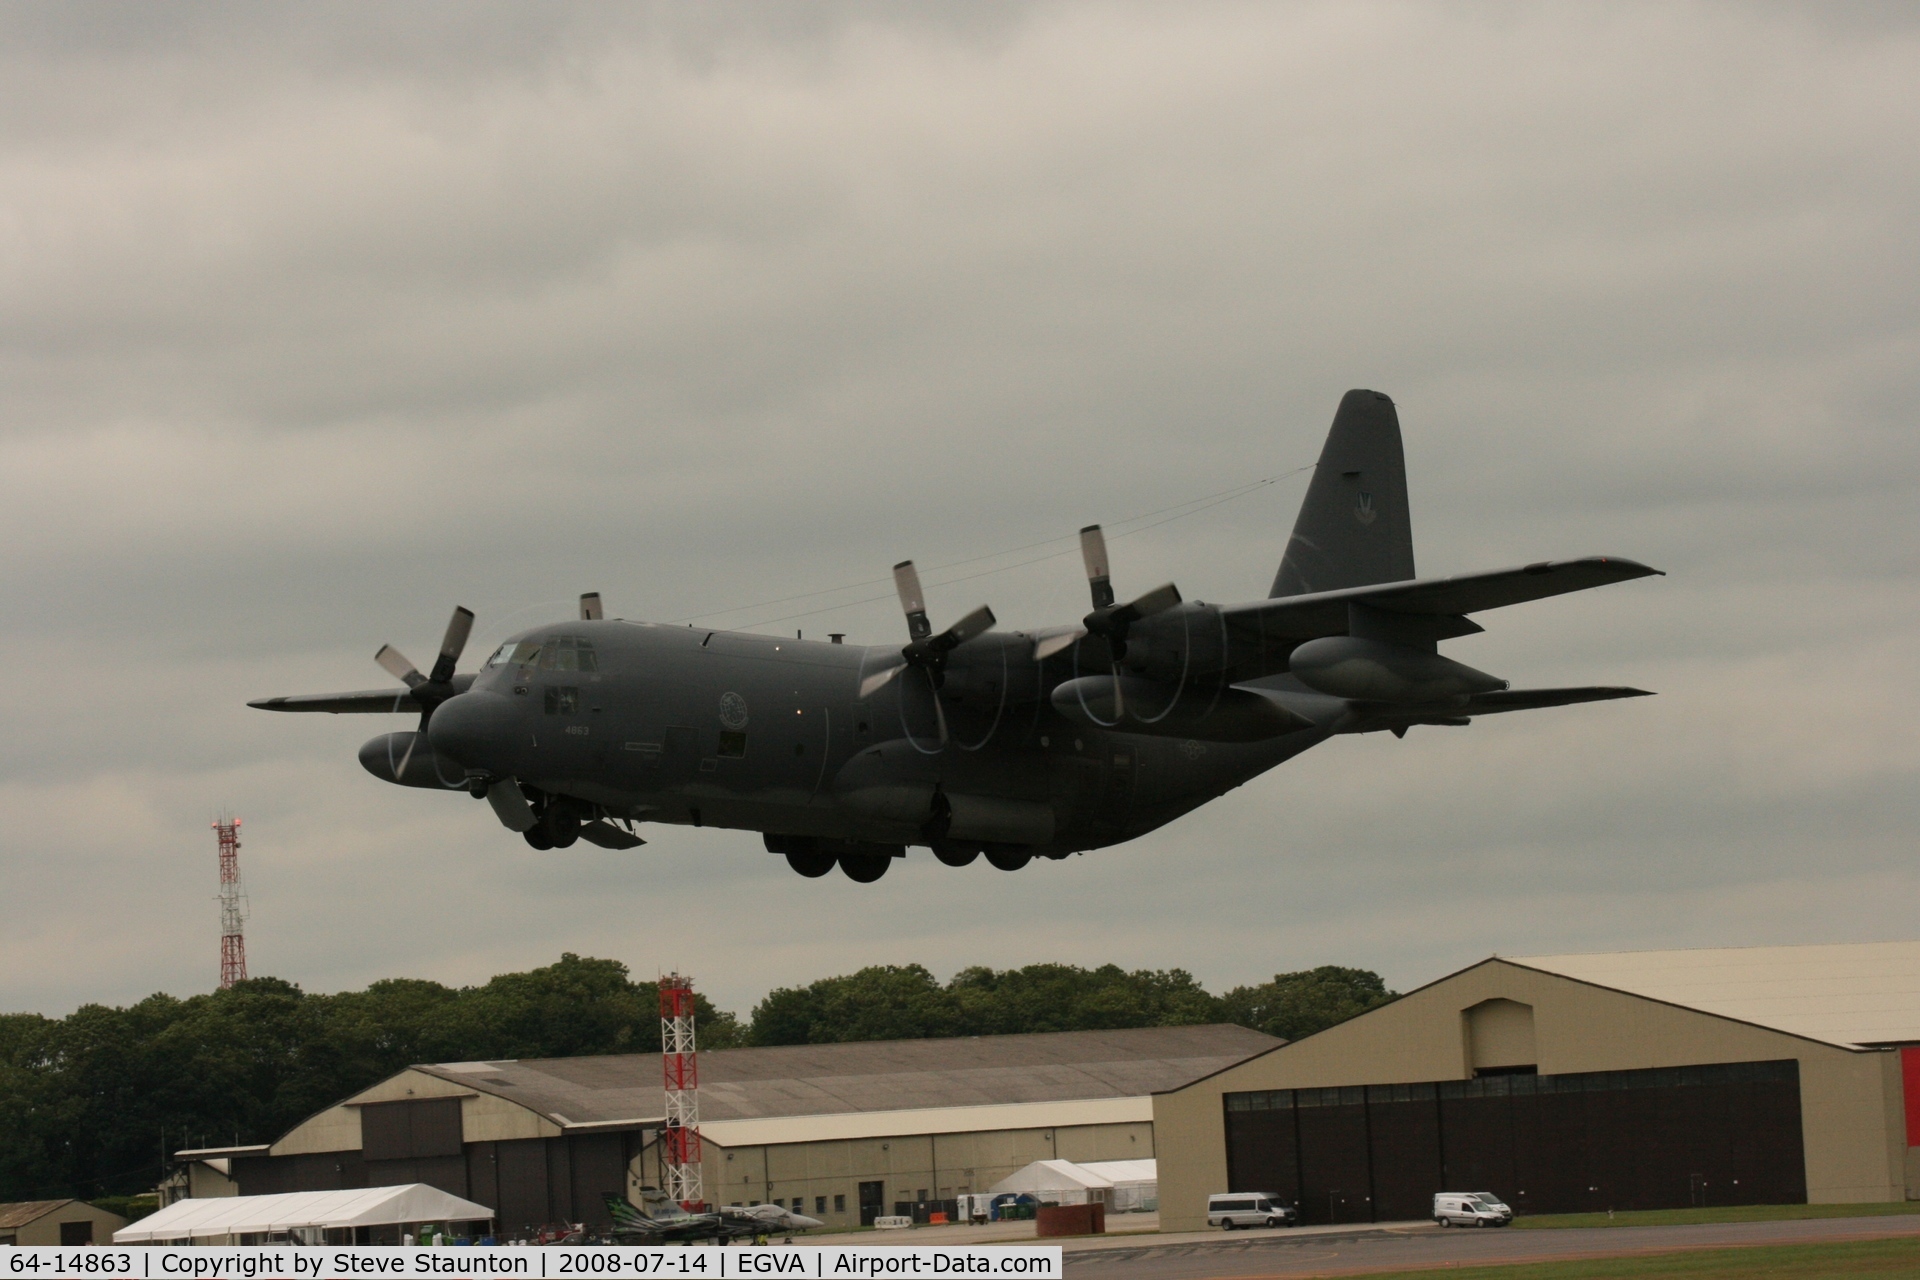 64-14863, 1964 Lockheed HC-130P Hercules C/N 382-4094, Taken at the Royal International Air Tattoo 2008 during arrivals and departures (show days cancelled due to bad weather)